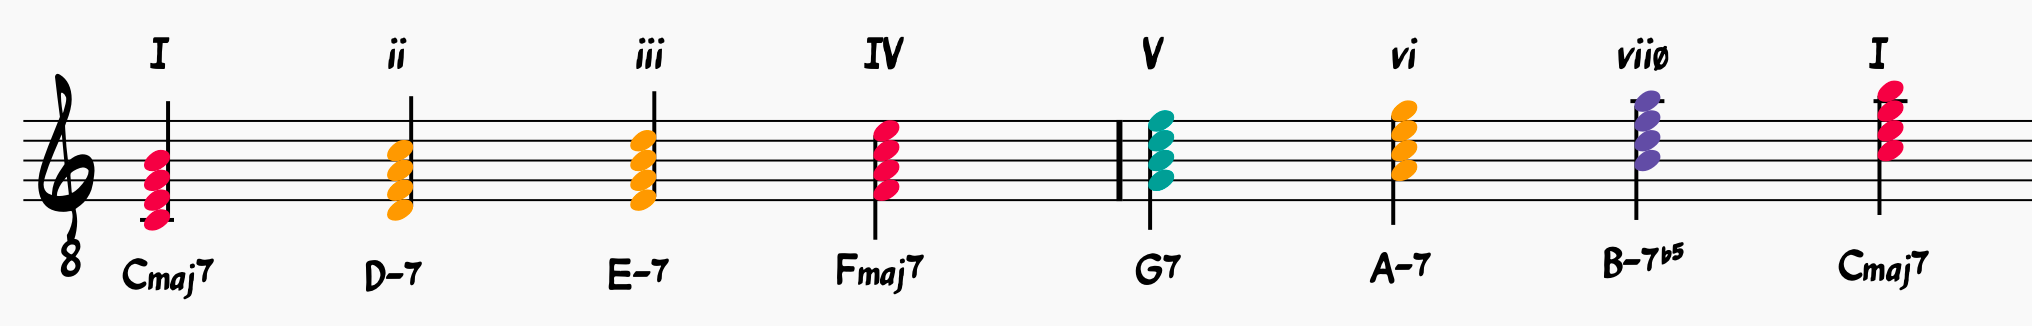 Color-coded seventh chords derived from the major scale: major seventh chord, dominant seventh chord, minor seventh chord, and half-diminished seventh chord